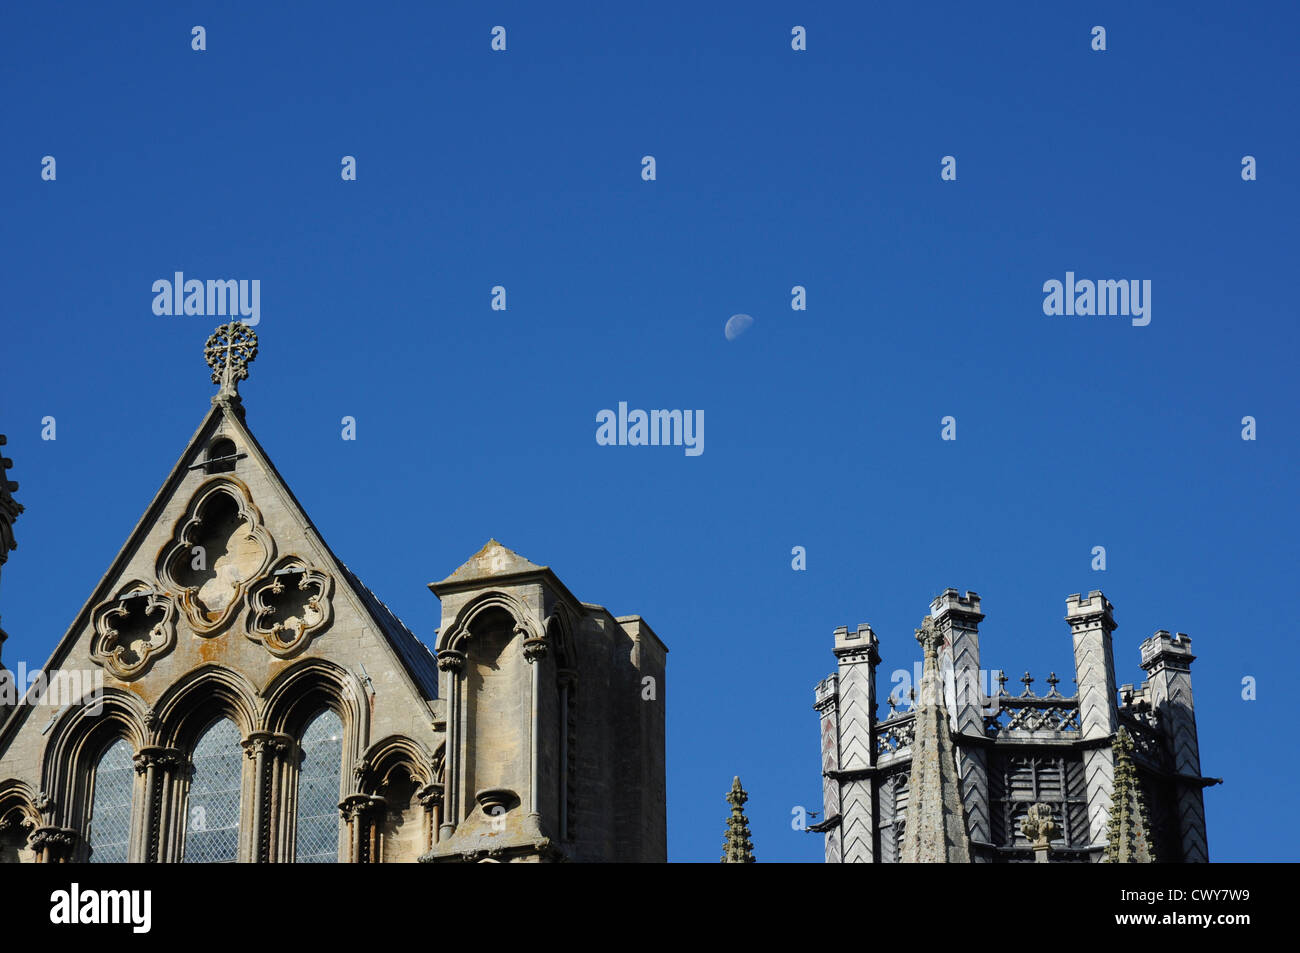 The moon over Ely Cathedral, Ely, Cambridgeshire, England, UK Stock Photo